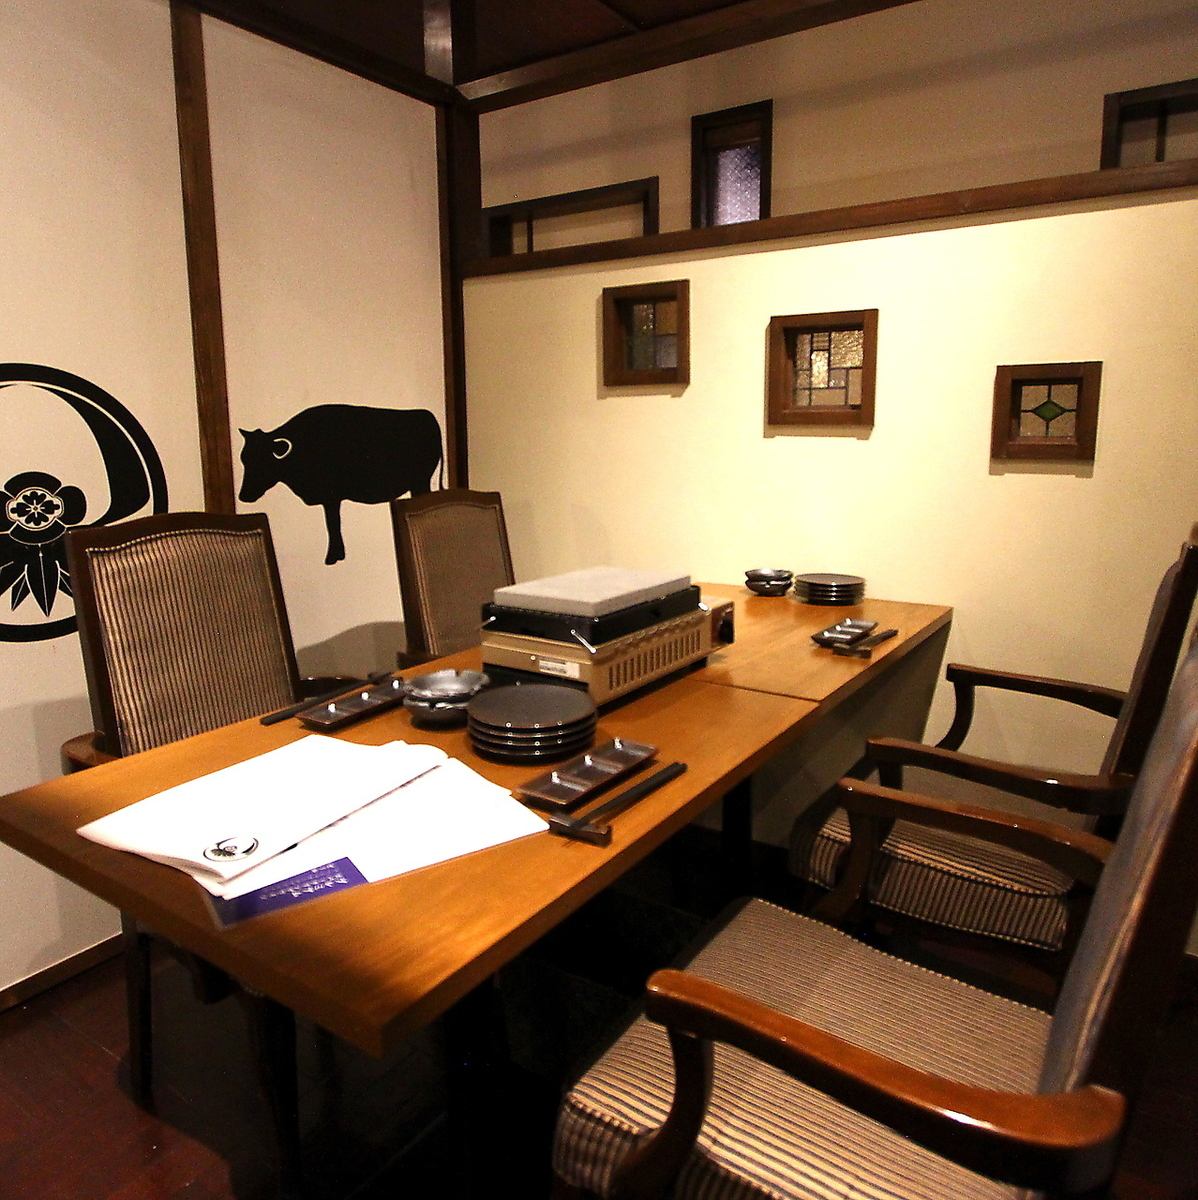 Enjoy really delicious meat in a calm private room inspired by the Taisho era ...